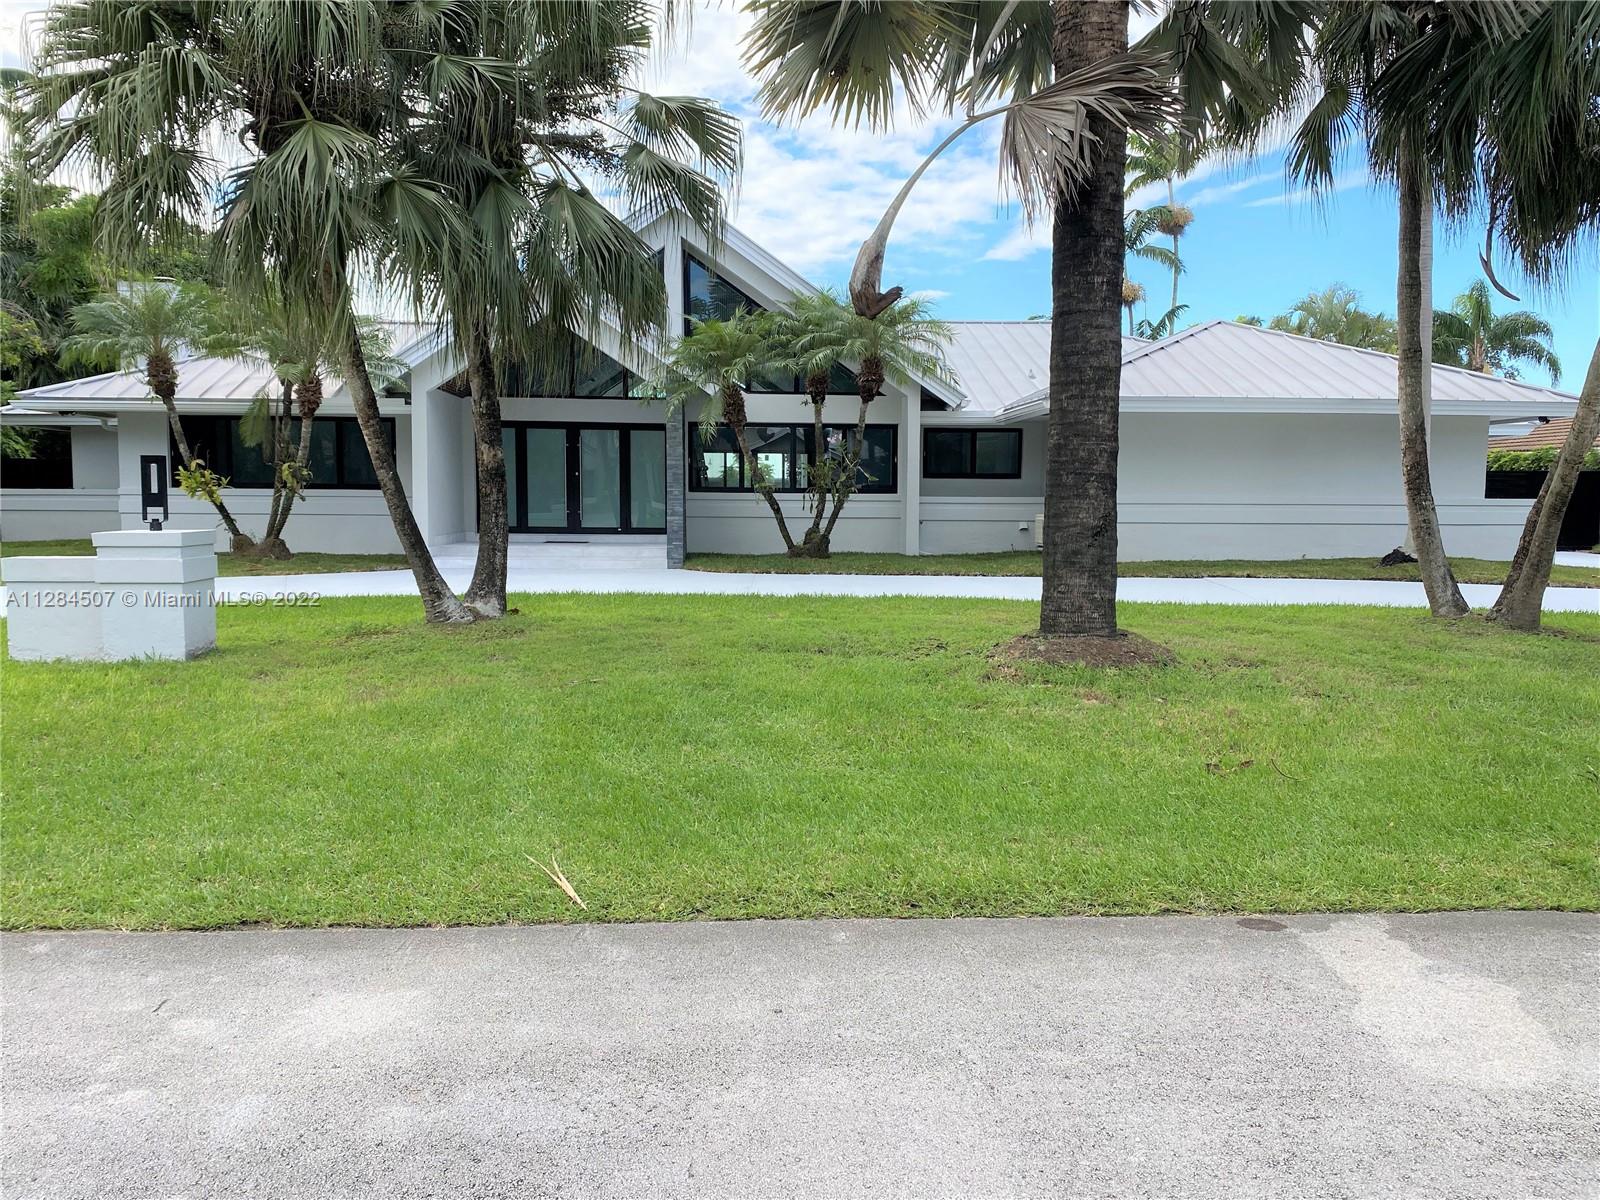 Be the first to see this gem, exquisitely renovated with remarkably fine details, no expense spared using only the finest and more expensive materials, huge 5 bedroom three and a half bath with 4,600 SF actual area set on a 16,999 SF. Cul d Sac lot in highly desirable location in Pinecrest, featuring soaring ceilings and windows - Open Light and bright, perfect Split Plan, immense Open Eat-in Kitchen that flows out to the beautiful open HEATED POOL and a Tranquil Tropical patio surrounded by a tremendous yard area perfect for entertainment, central vacuum, 2 car garage, completely fenced and gated, beautiful metal roof, impact doors and windows and much much more to mention here, ready to move right in, Come see it, you will fall in LOVE